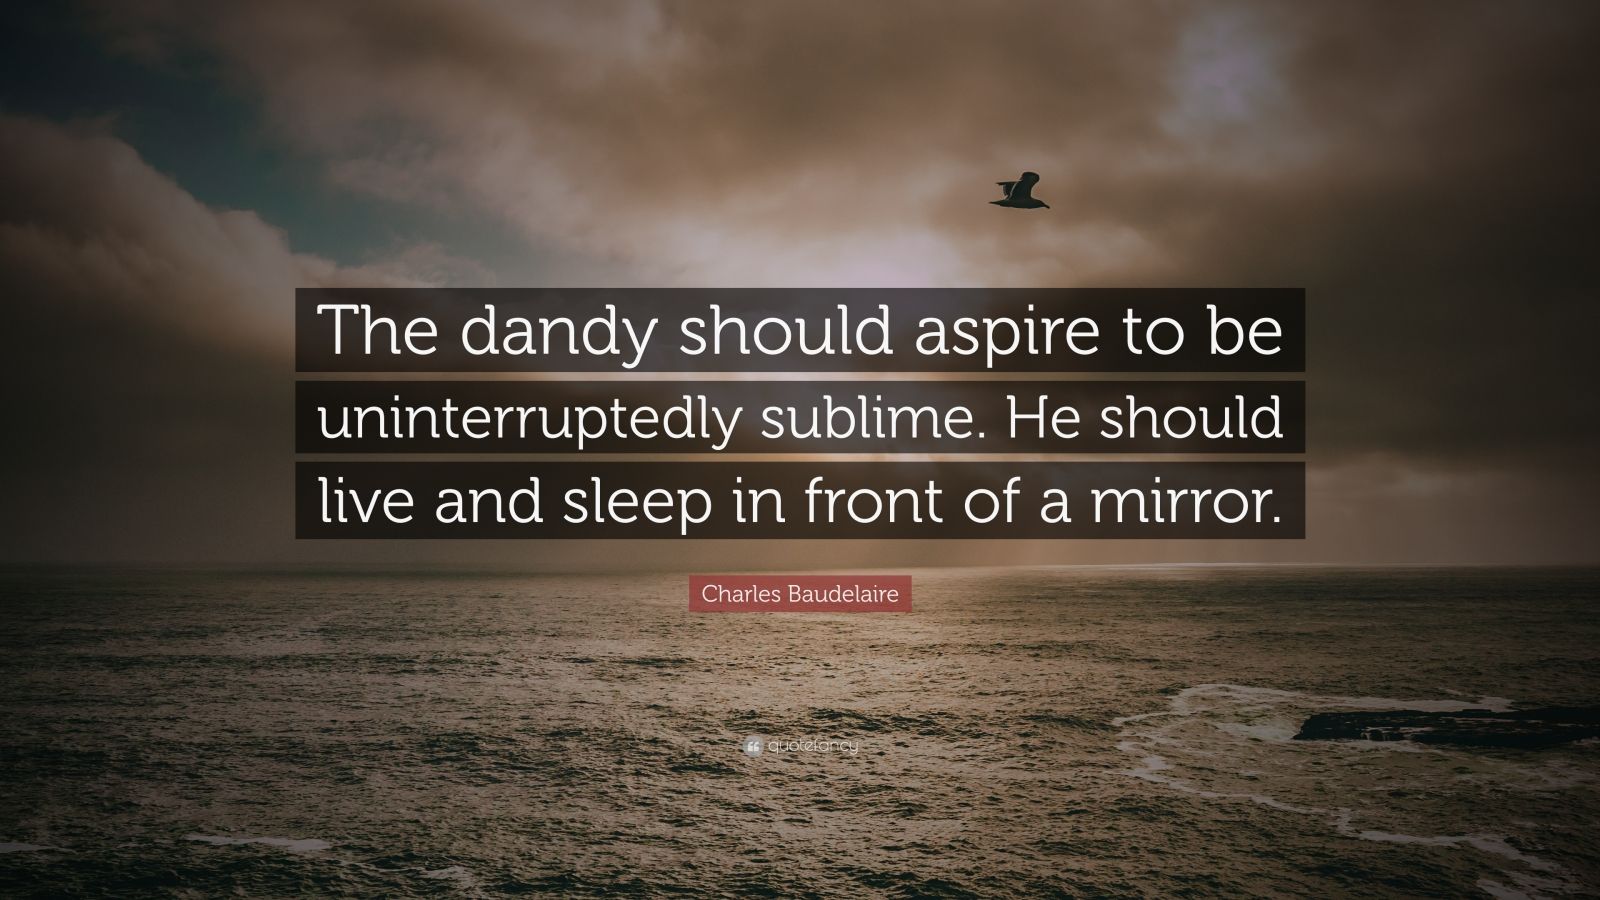 Charles Baudelaire Quote: “The dandy should aspire to be ...